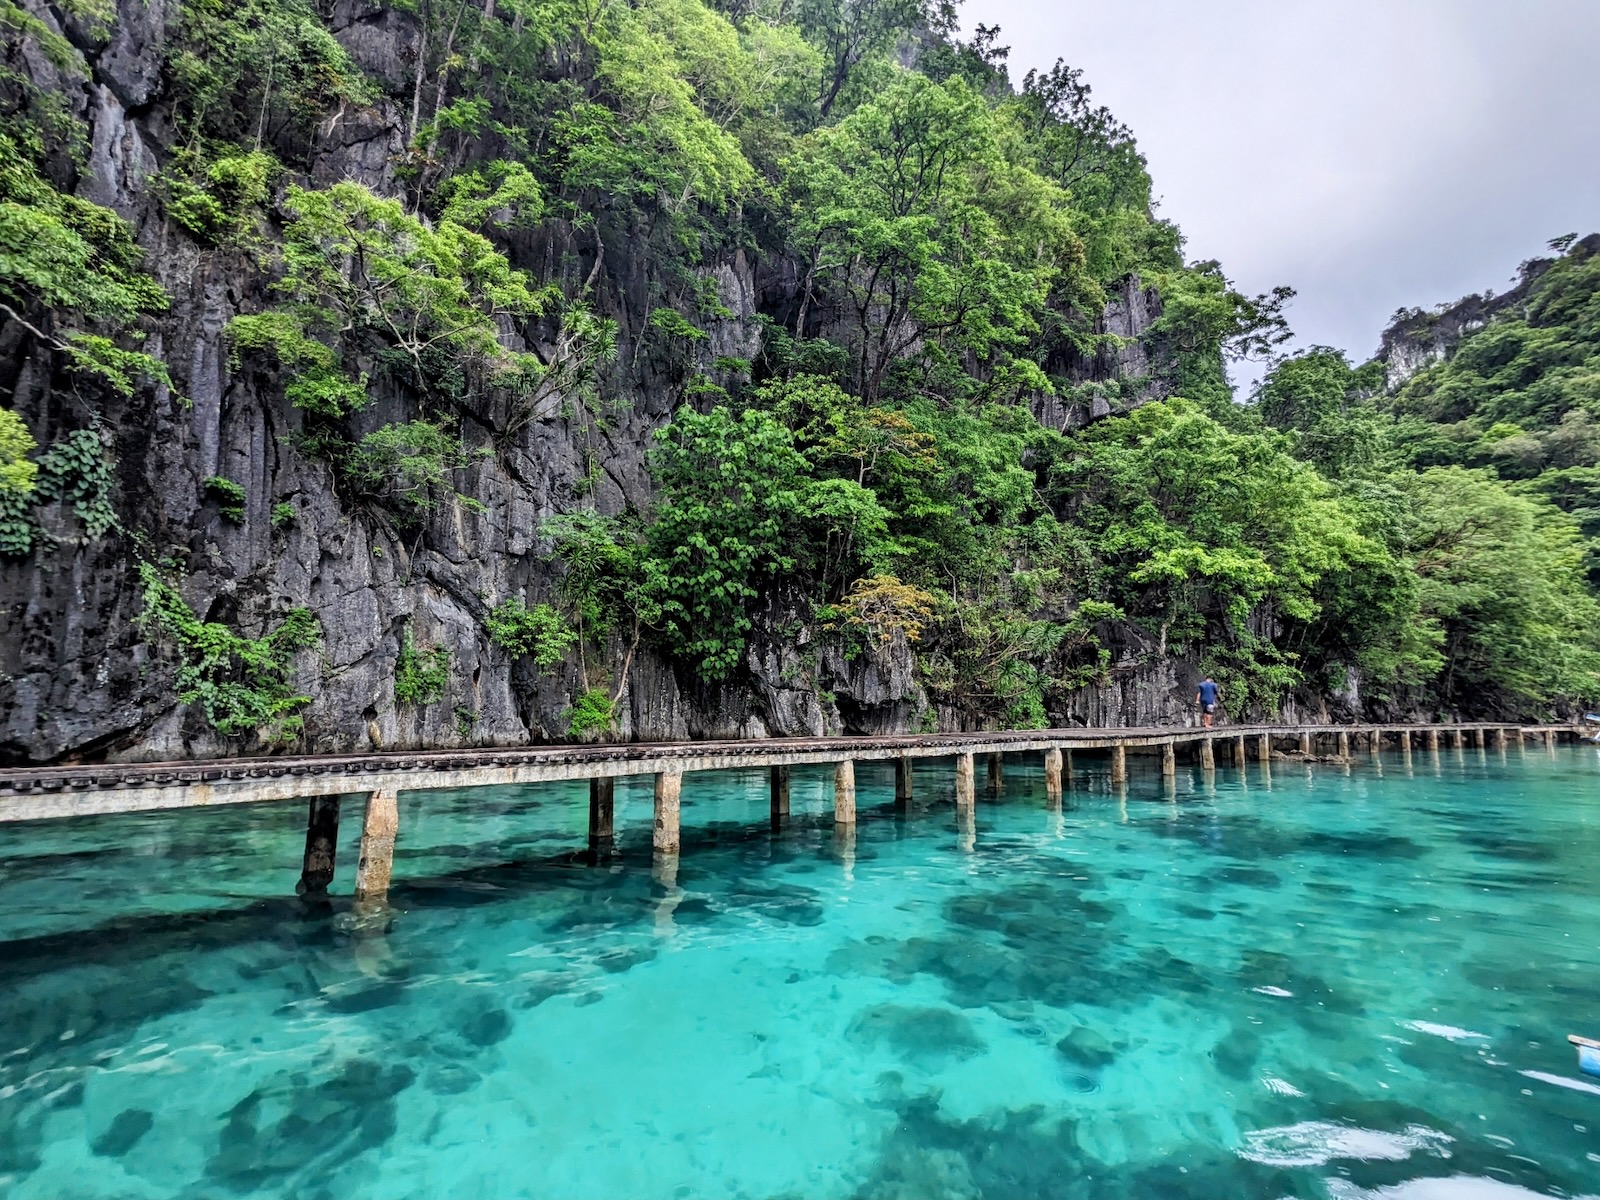 Wooden walkway over clear turquoise water